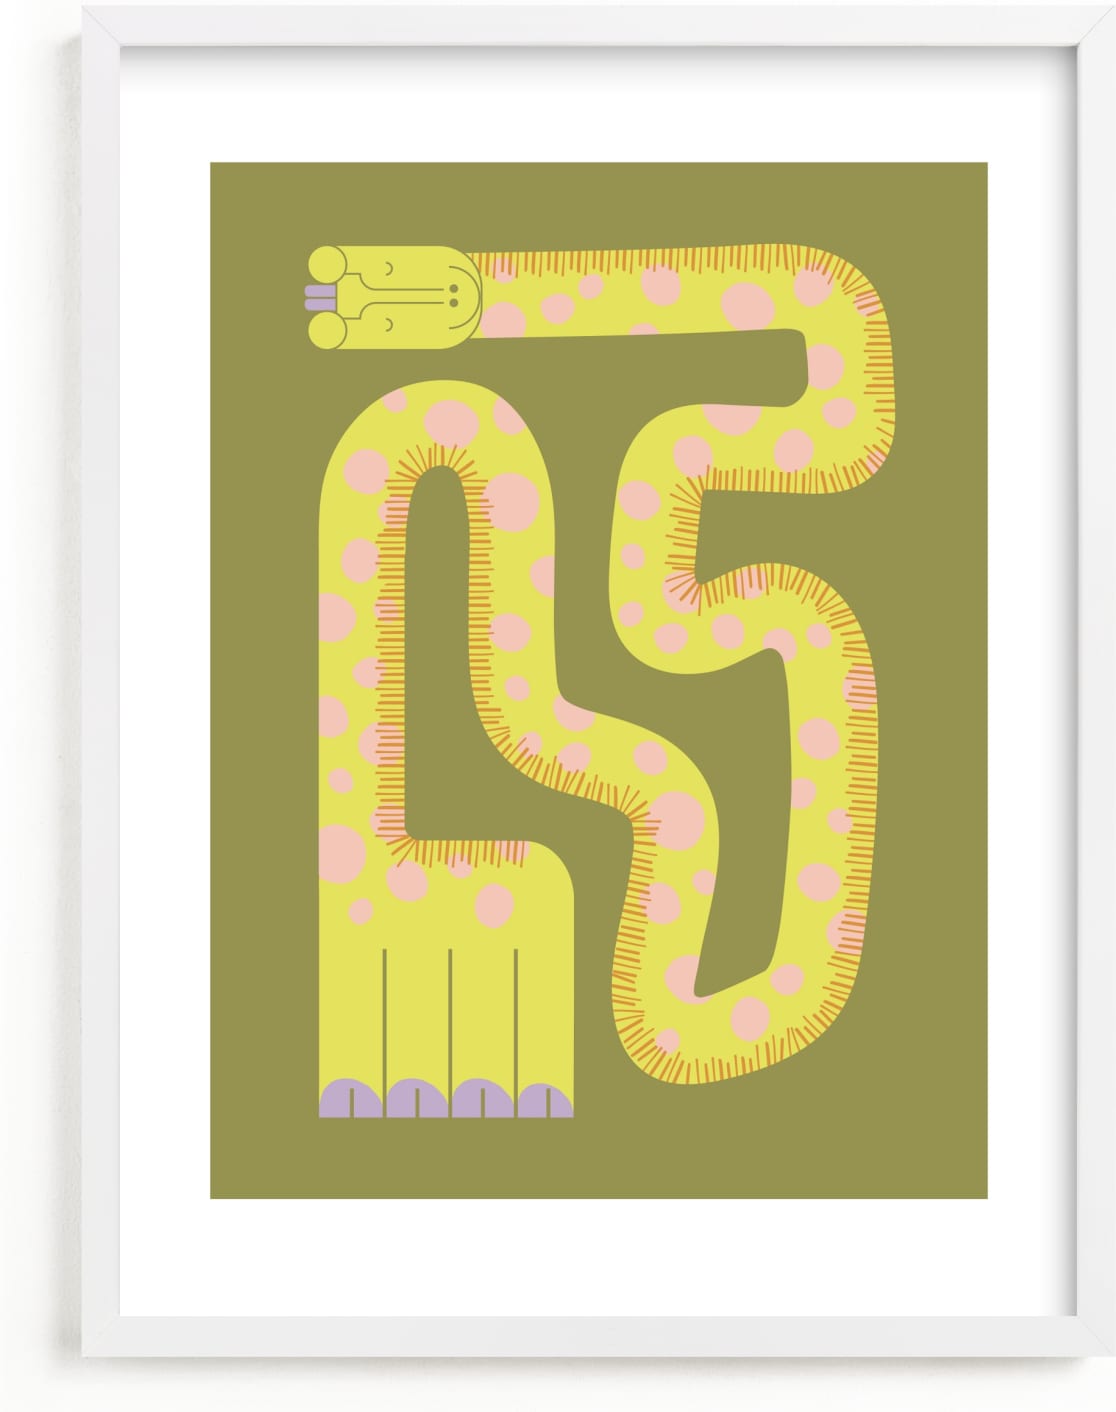 This is a pink kids wall art by Ampersand Design Studio called Twisty Giraffe.